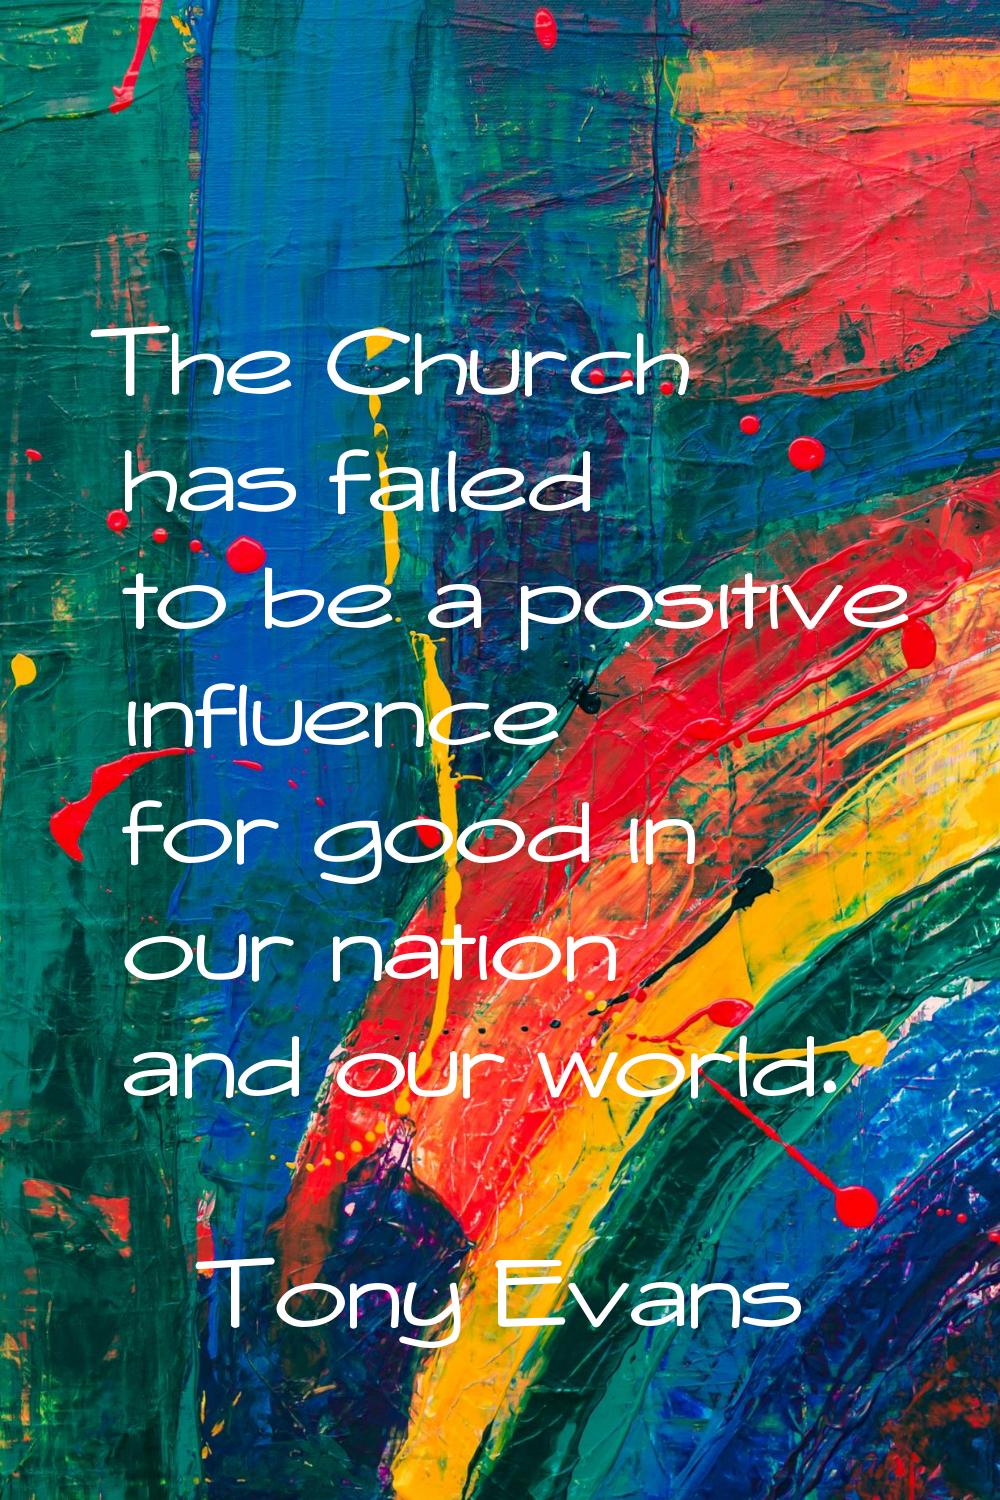 The Church has failed to be a positive influence for good in our nation and our world.